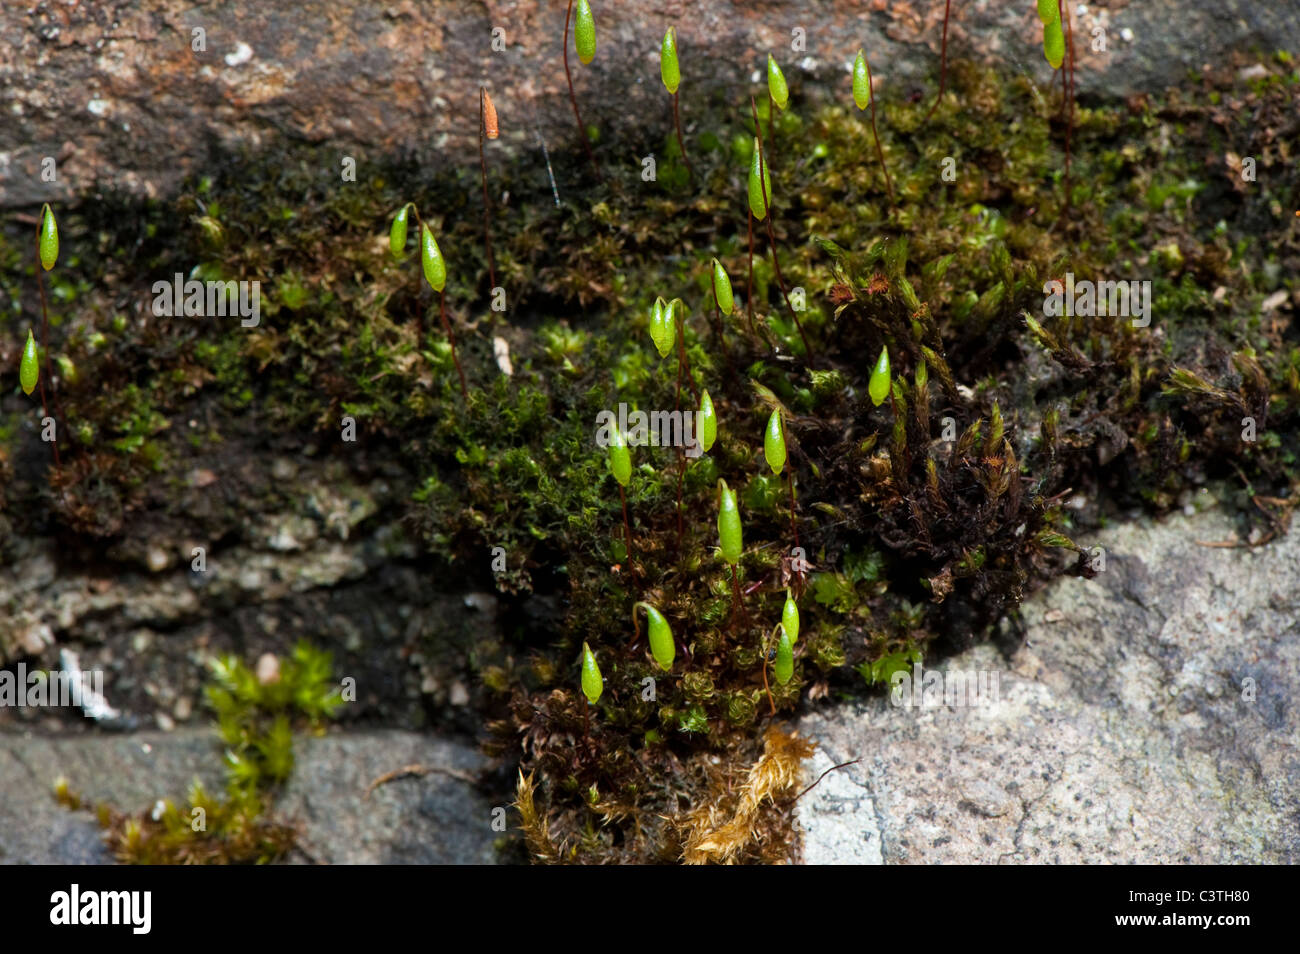 Bryum capillare moss and seed head on rocks in shady woodland Stock Photo